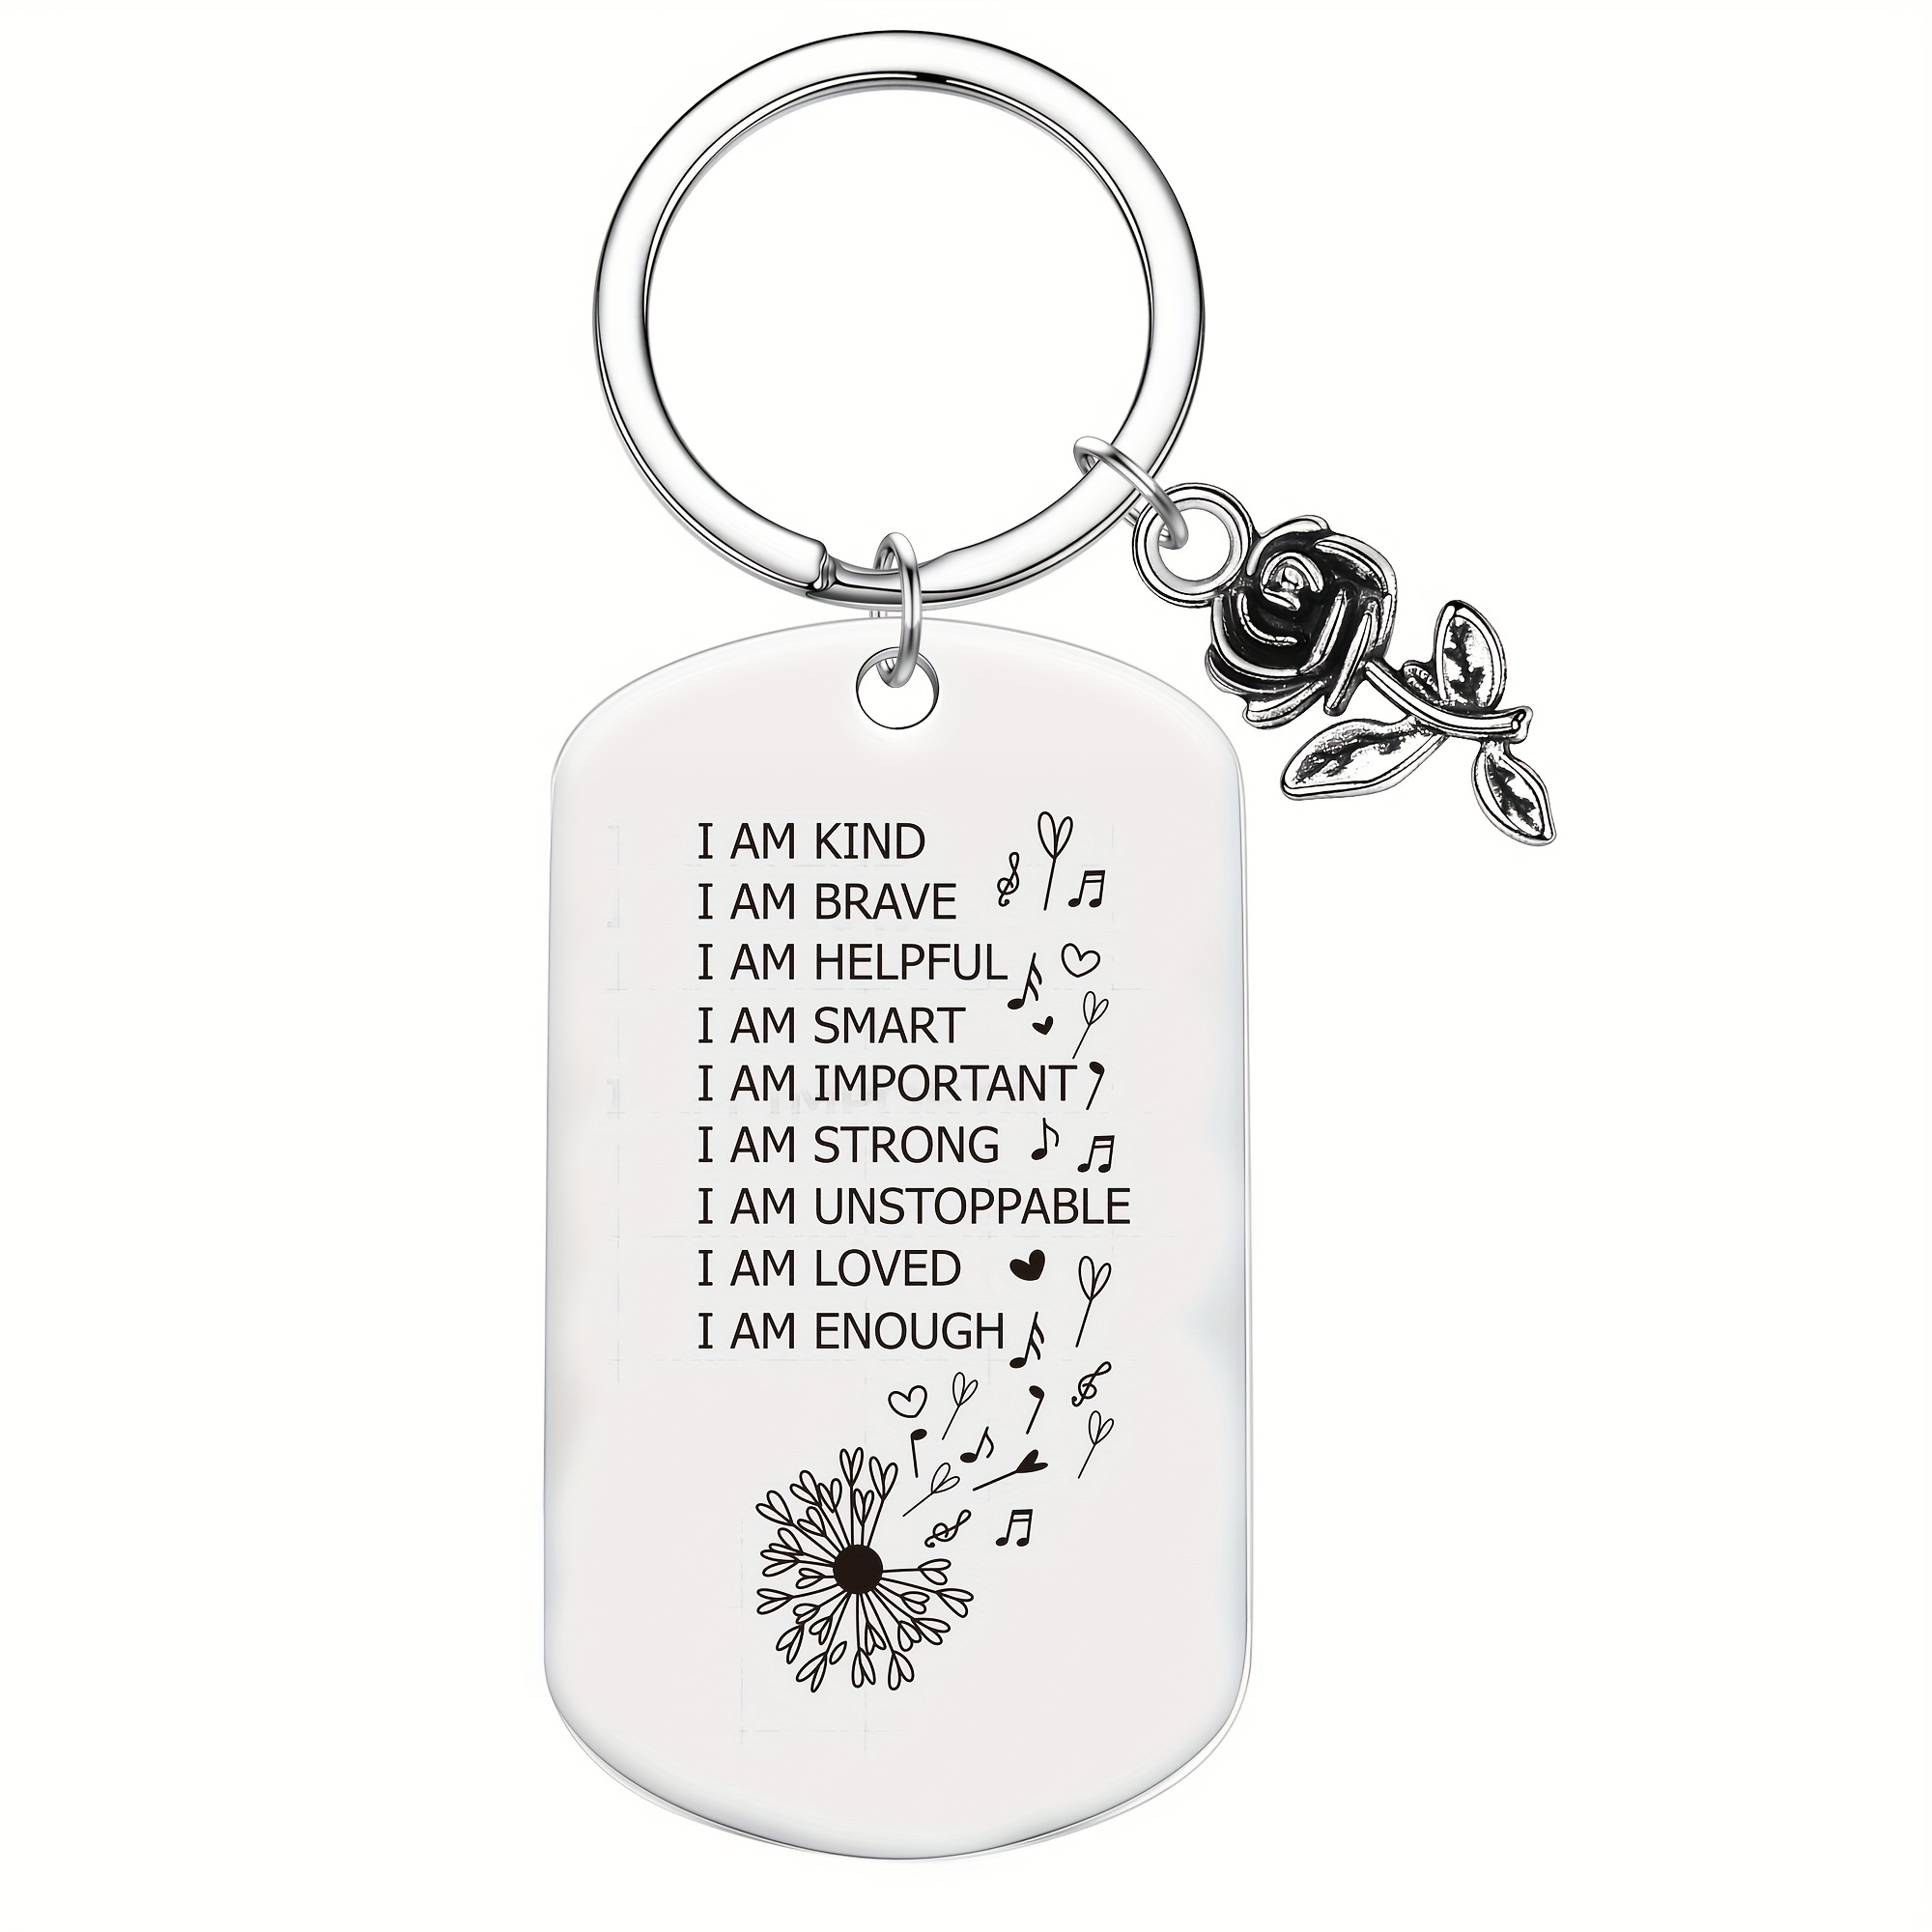 Truelove Designs Shop Motivational Positive Sayings Keychains, Inspirational Uplifting, Unique Message Gift, Affirmation Statement, Inspirational Message I Am A Magnet of